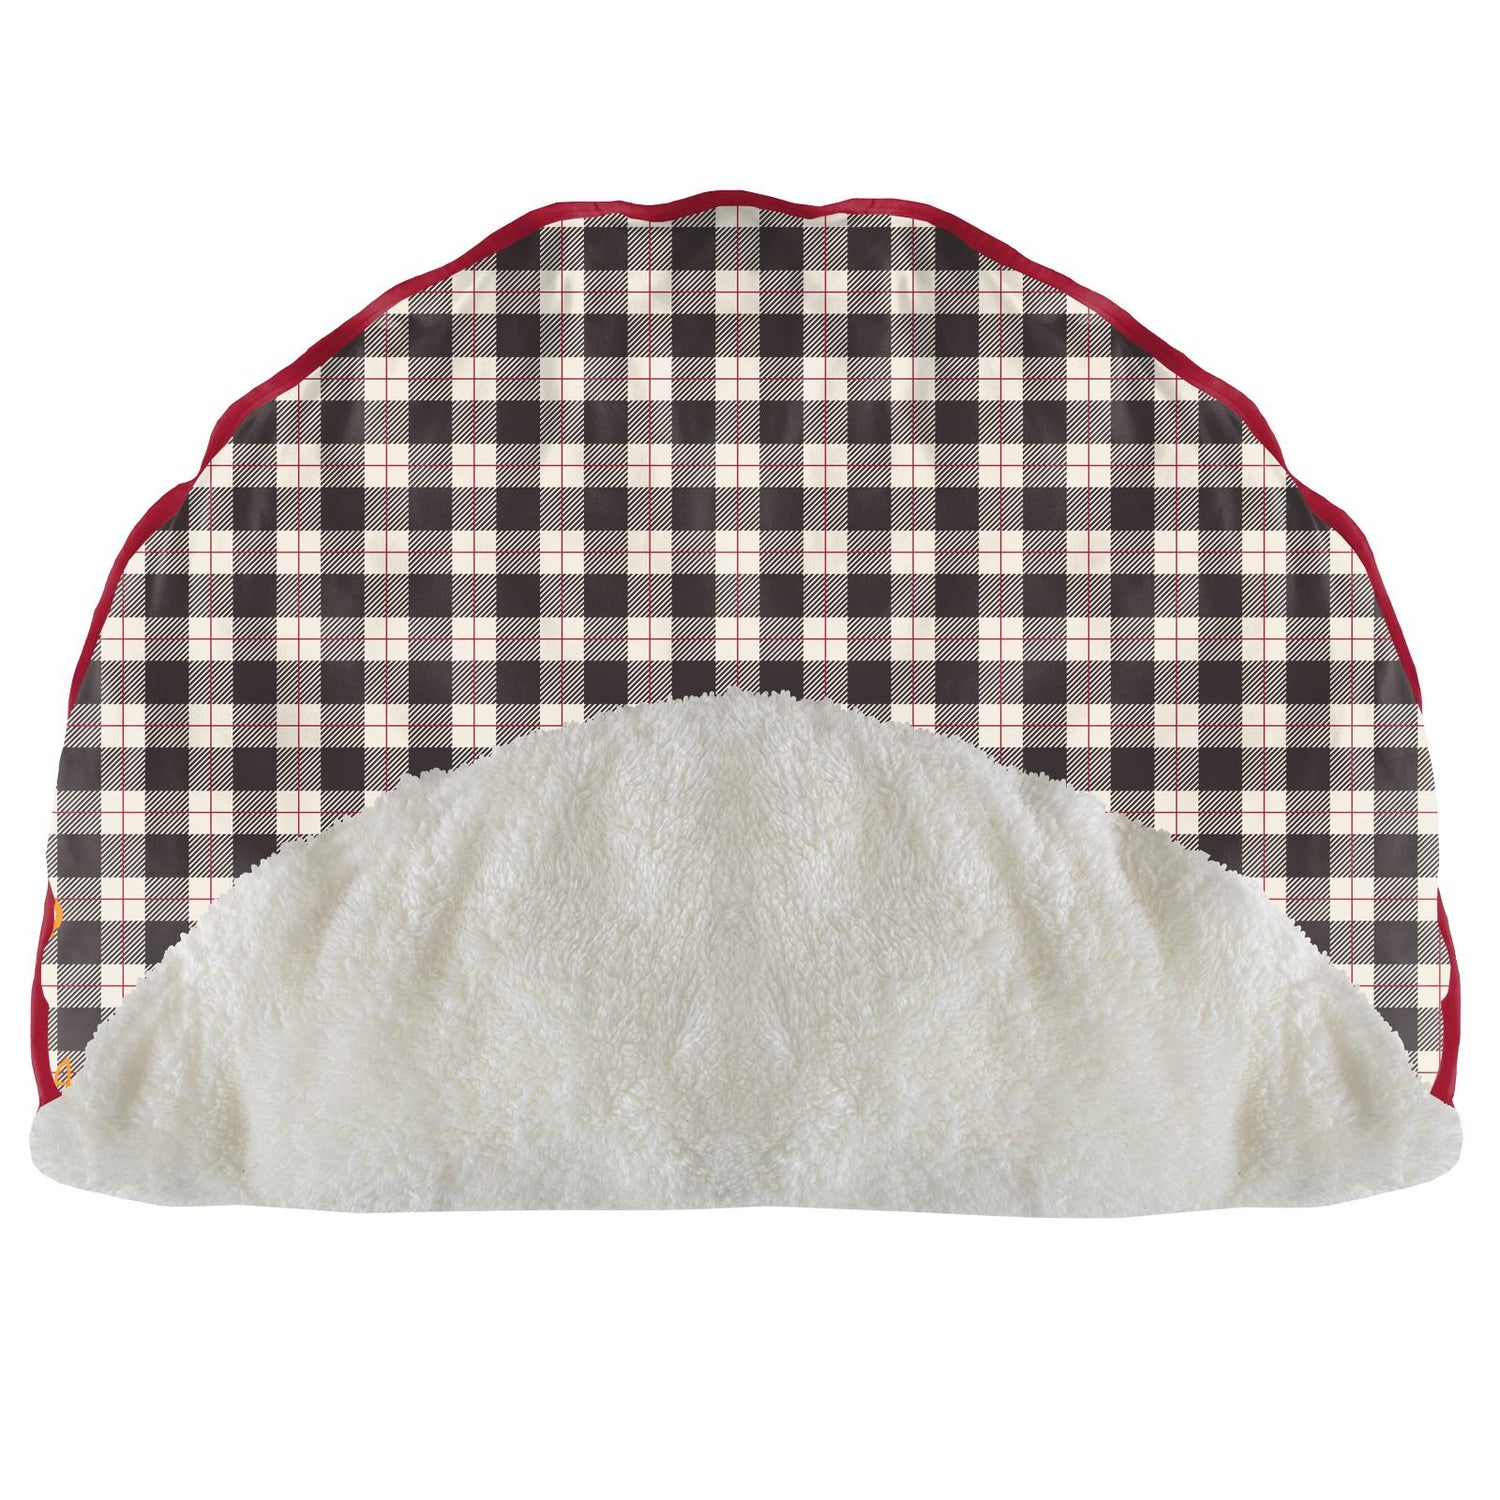 Print Sherpa-Lined Fluffle Playmat in Midnight Holiday Plaid